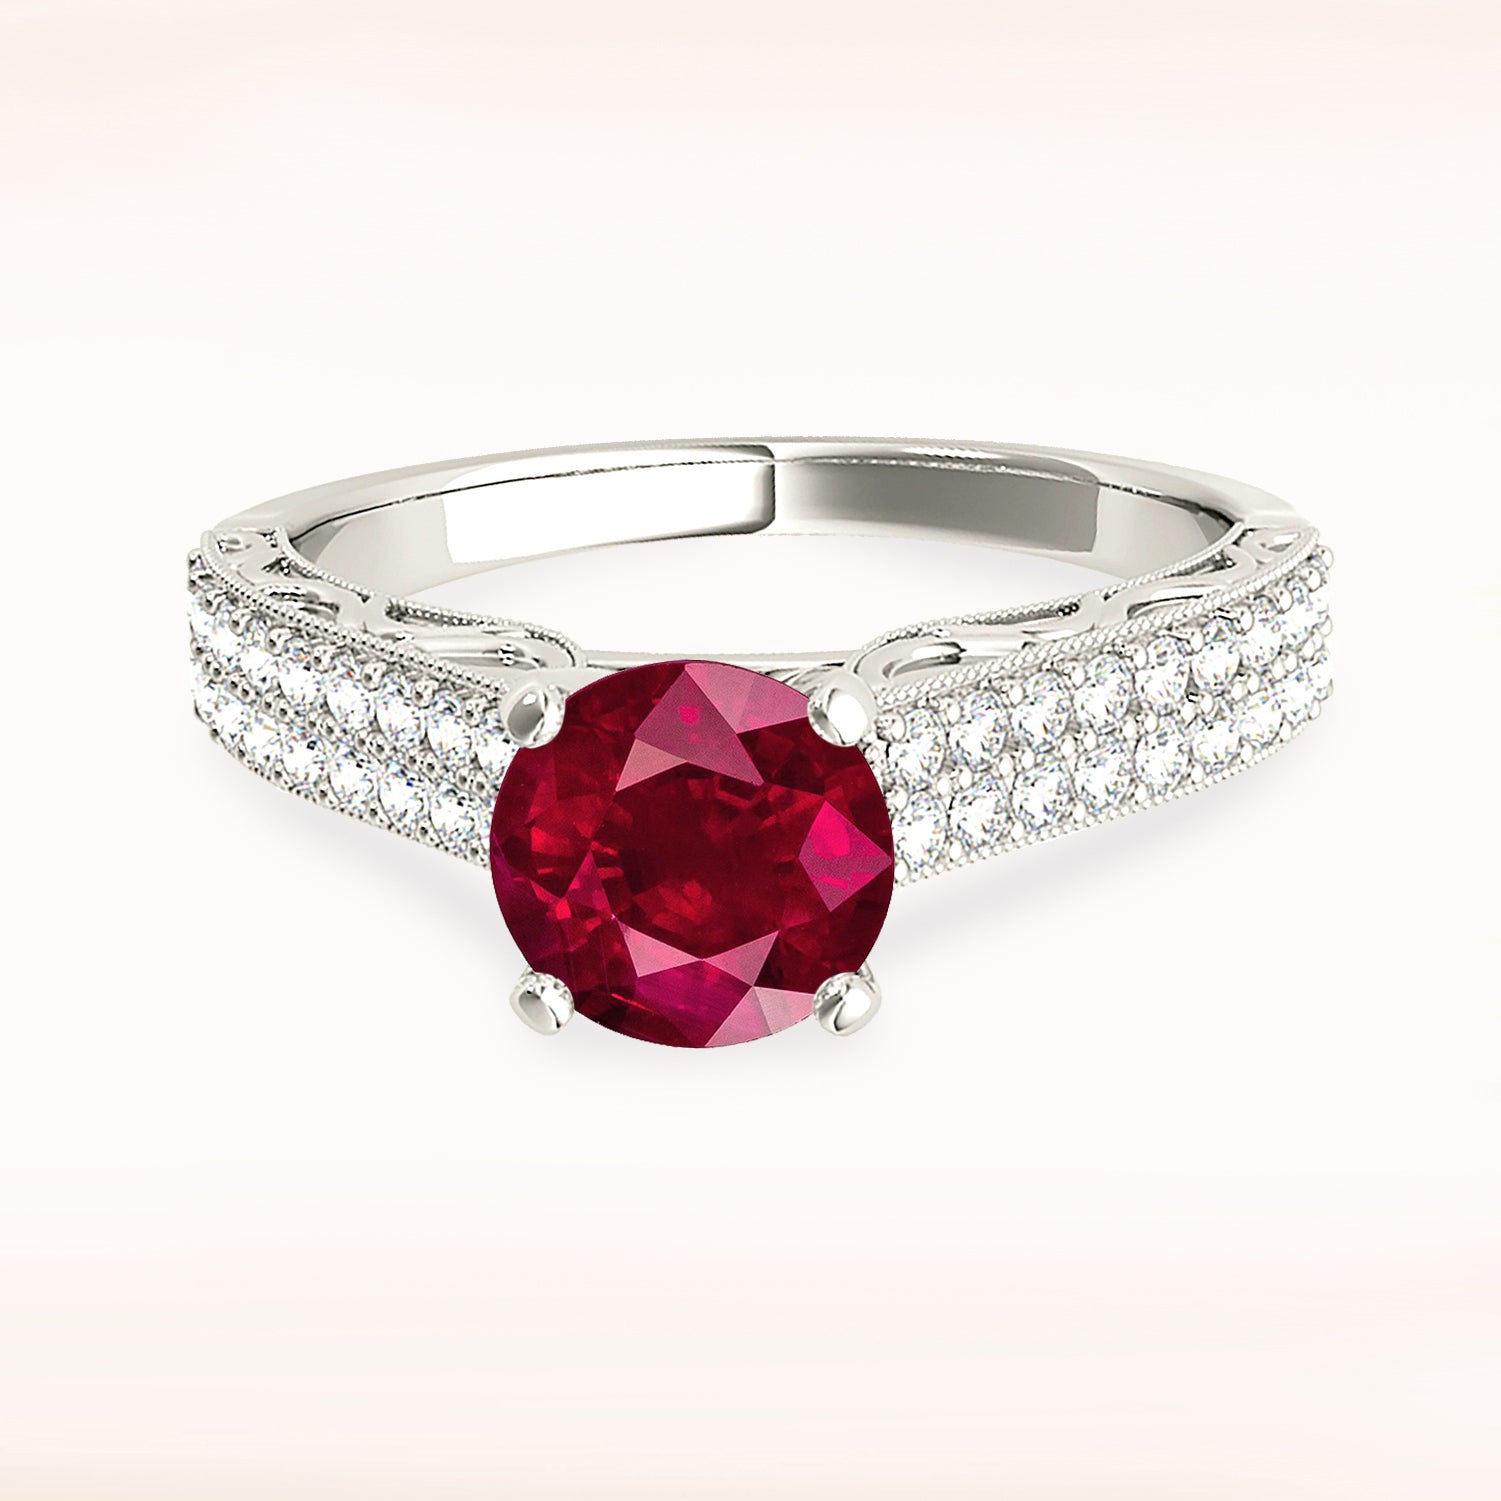 1.35 ct. Genuine Solitaire Ruby Ring with 0.35 ctw. Double Row Diamond Band,Milgrain Design-in 14K/18K White, Yellow, Rose Gold and Platinum - Christmas Jewelry Gift -VIRABYANI